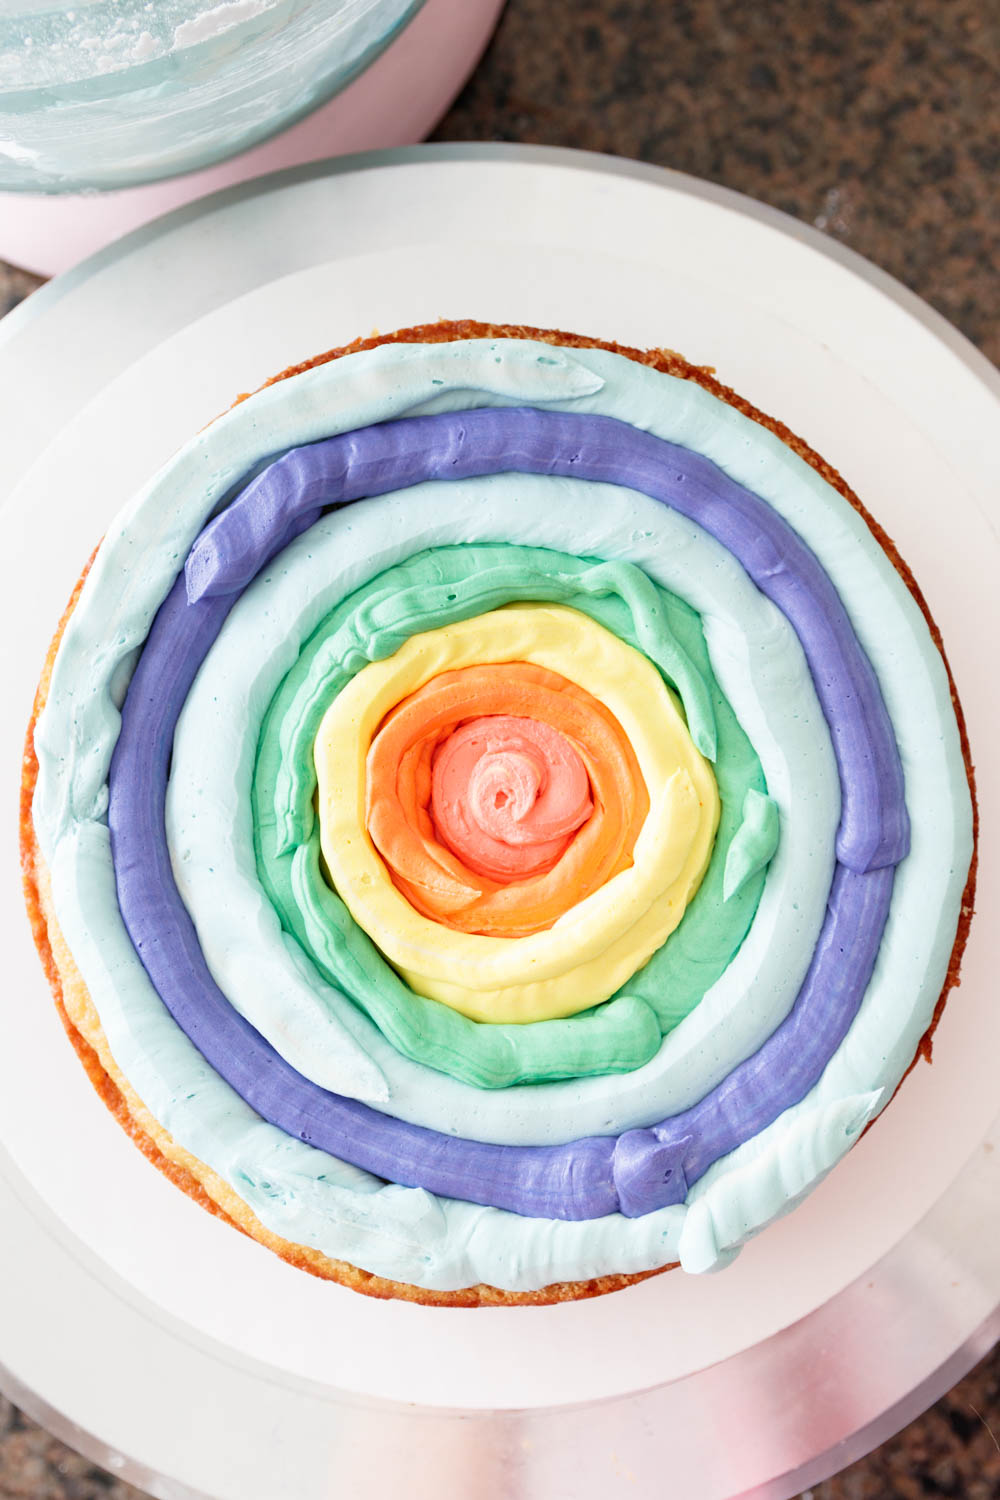 Top-down image showing how the circles should look when you pipe the filling to achieve the rainbow effect once you slice the cake.